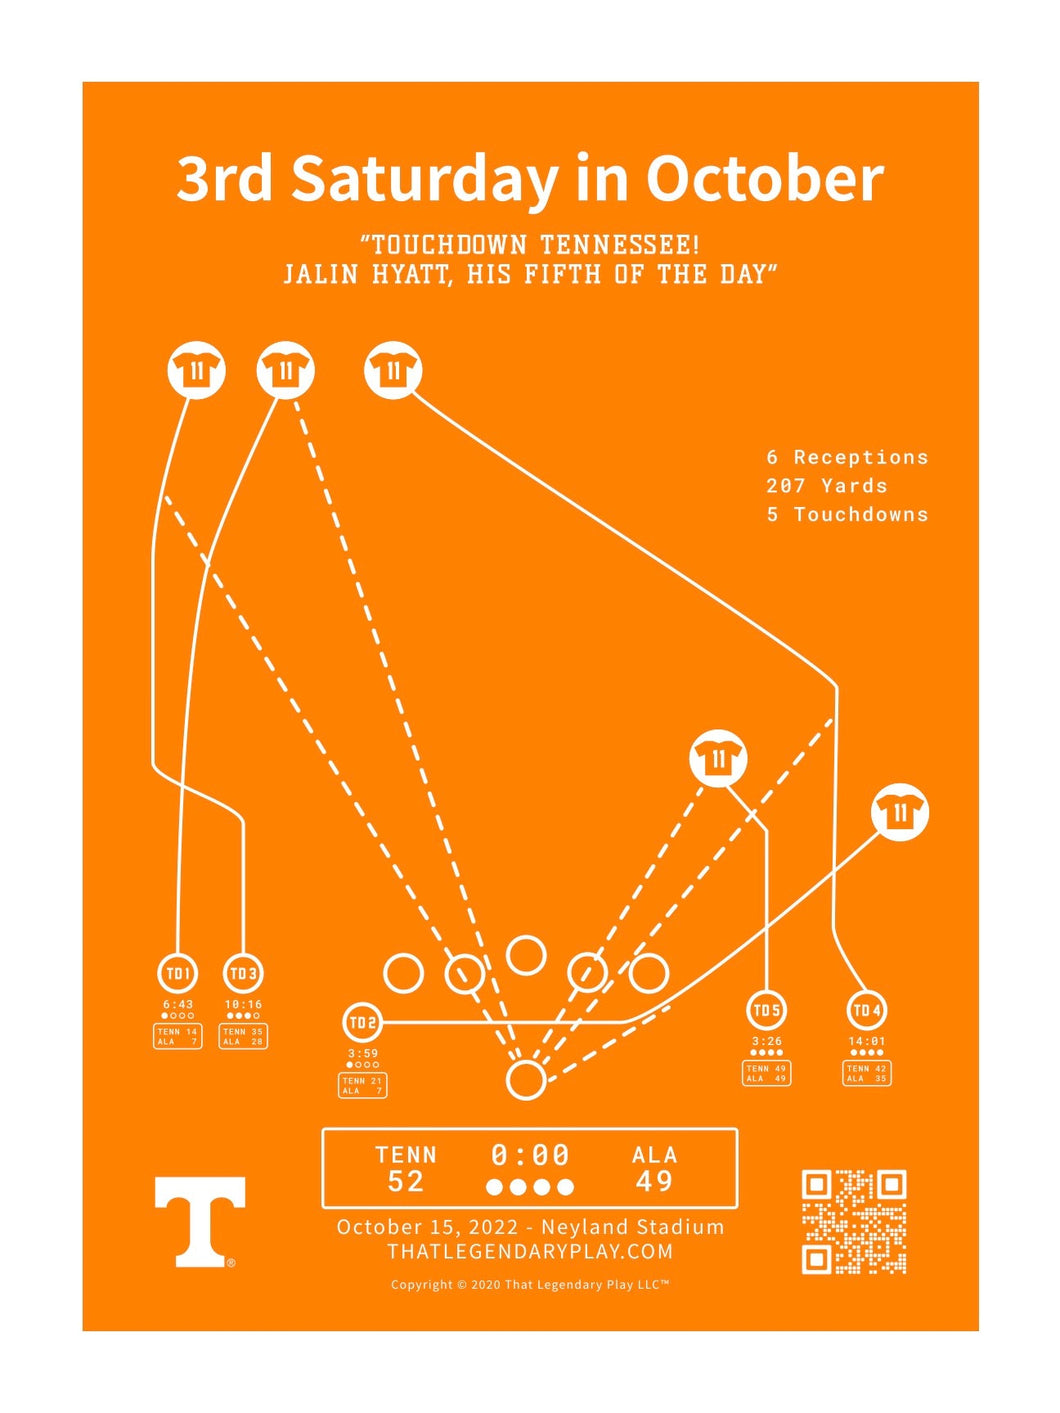 3rd Saturday in October - Signed